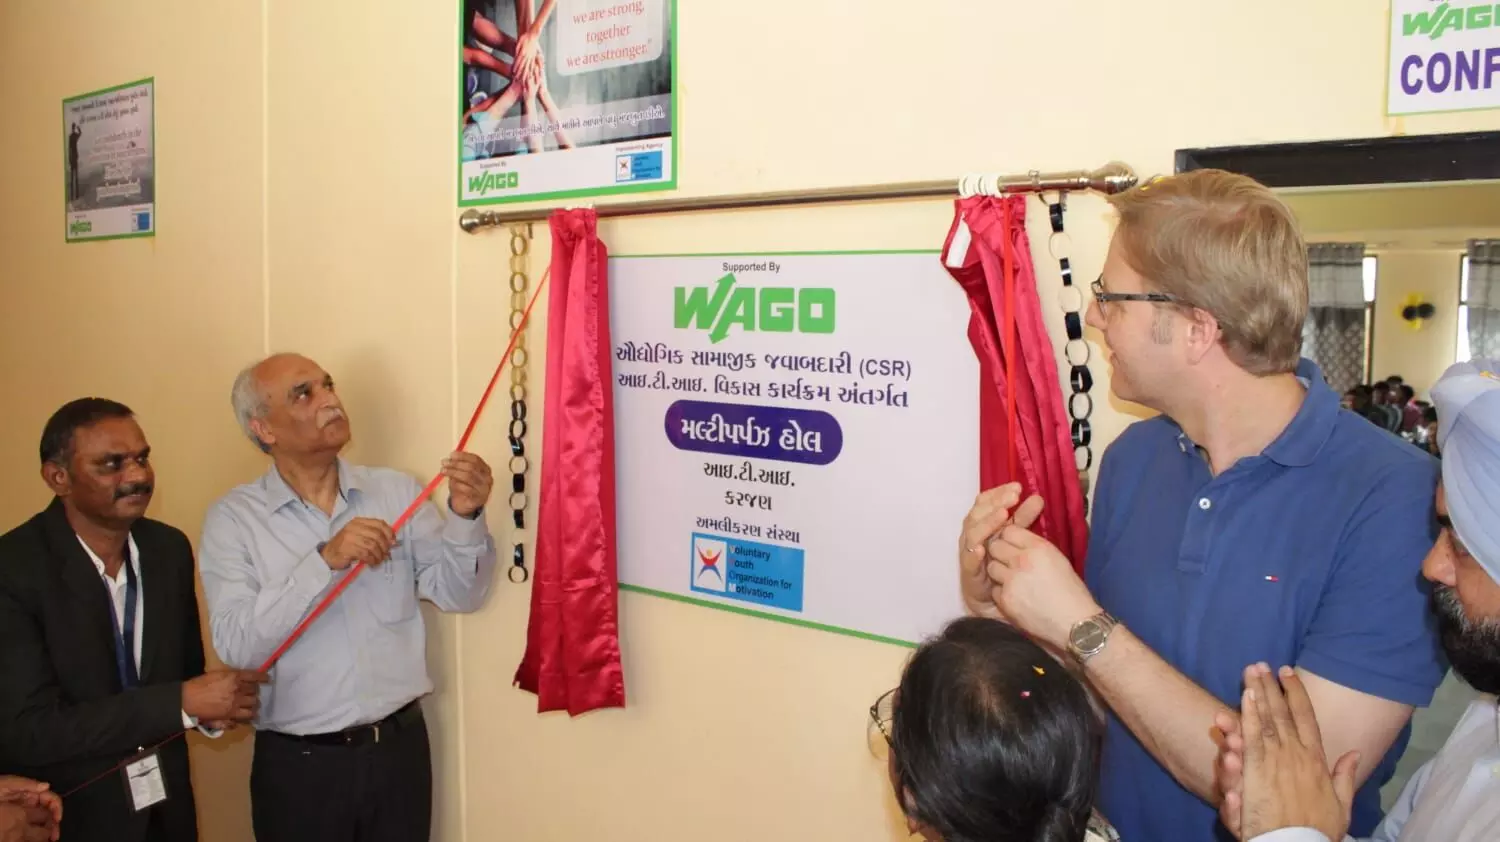 WAGO in association with VYOM, inaugurated the newly transformed Government ITI at Karjan